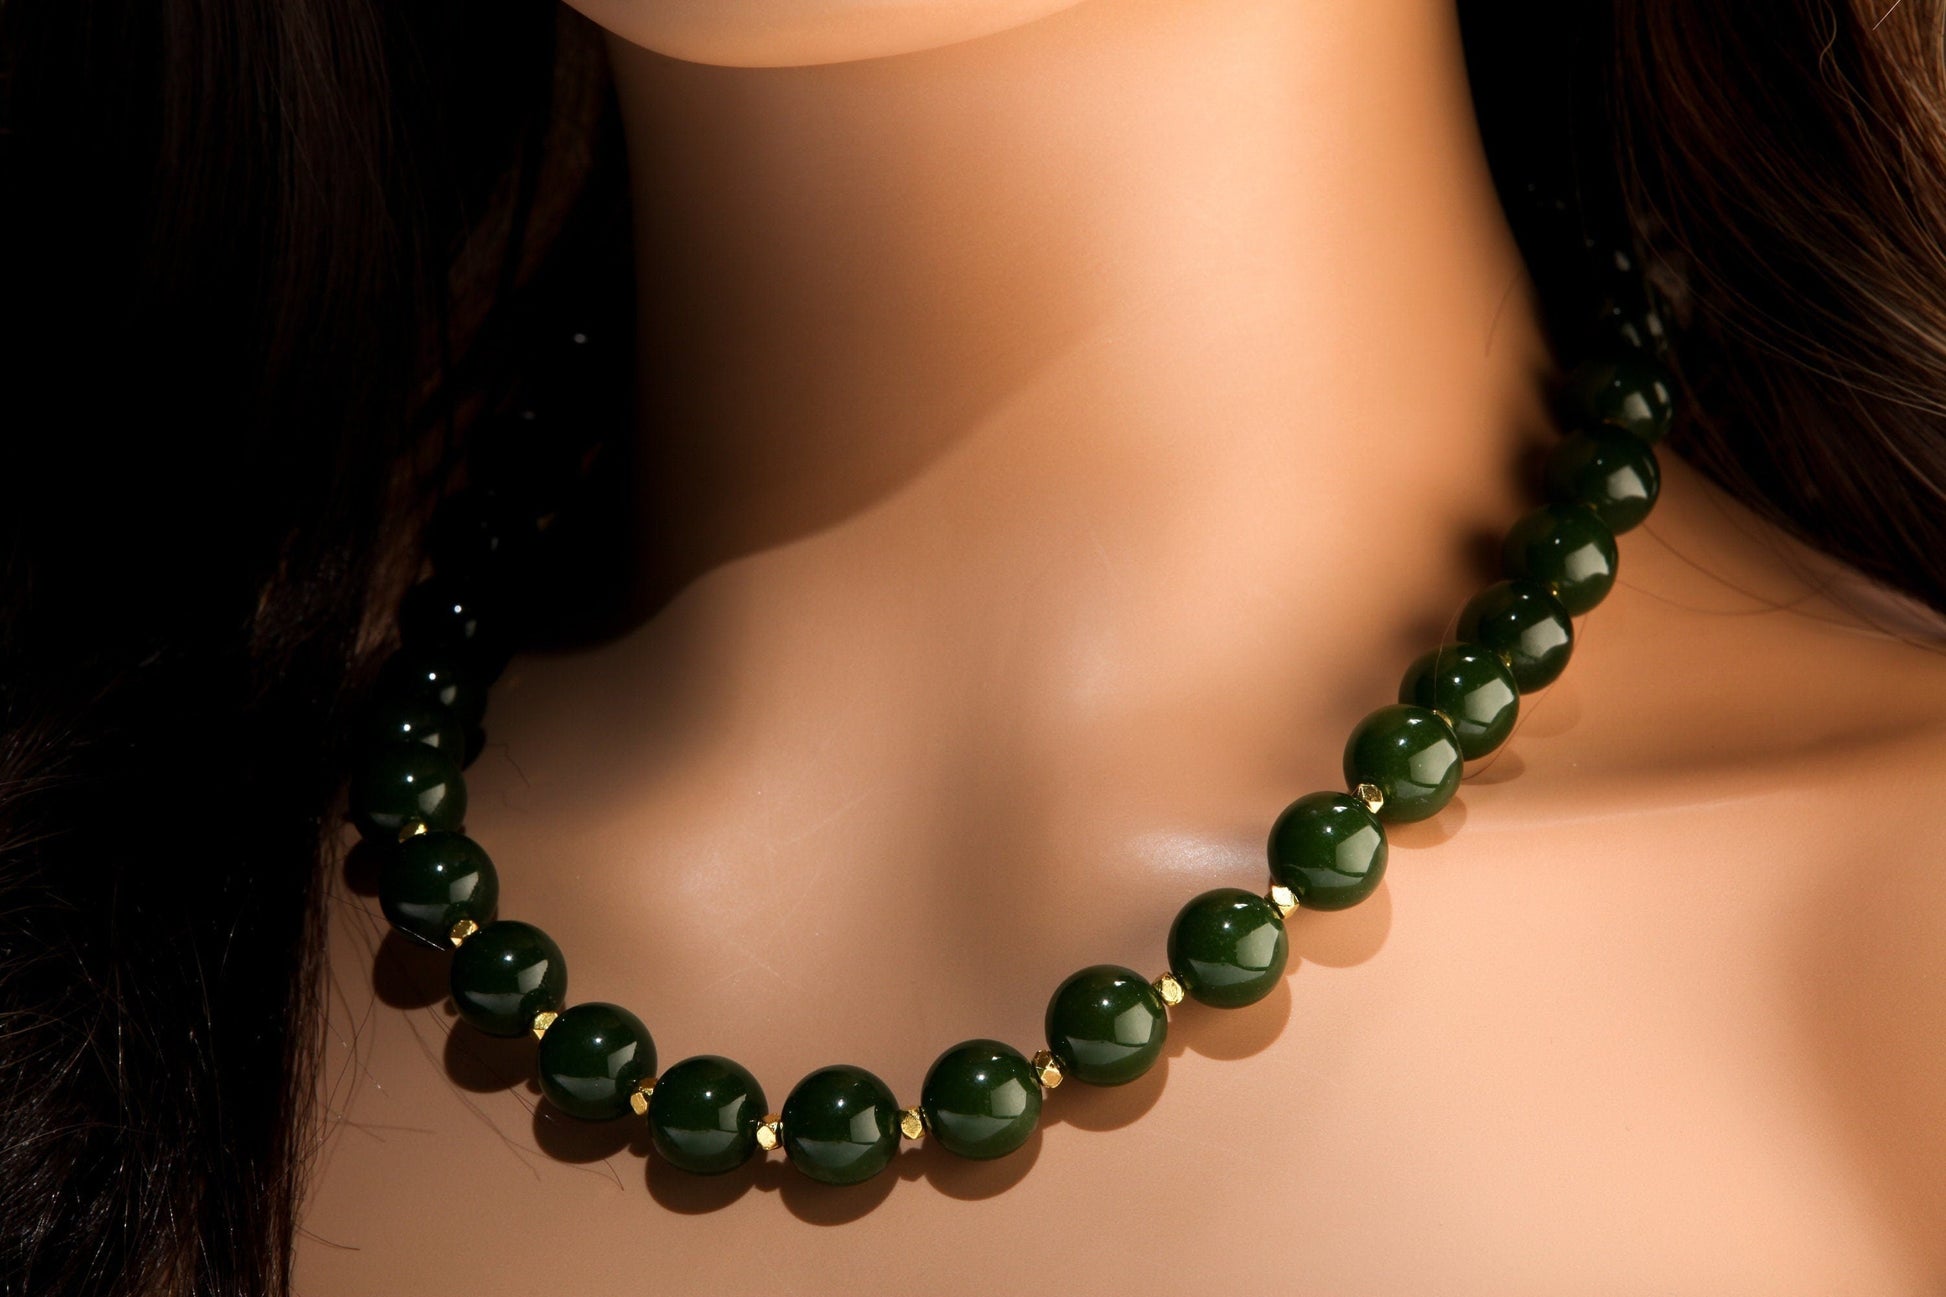 Canadian Nephrite Jade 12mm 18”Gold Necklace with 2” Extension Chain. High Quality Natural Jade smooth polished Bead. Gift for Mom